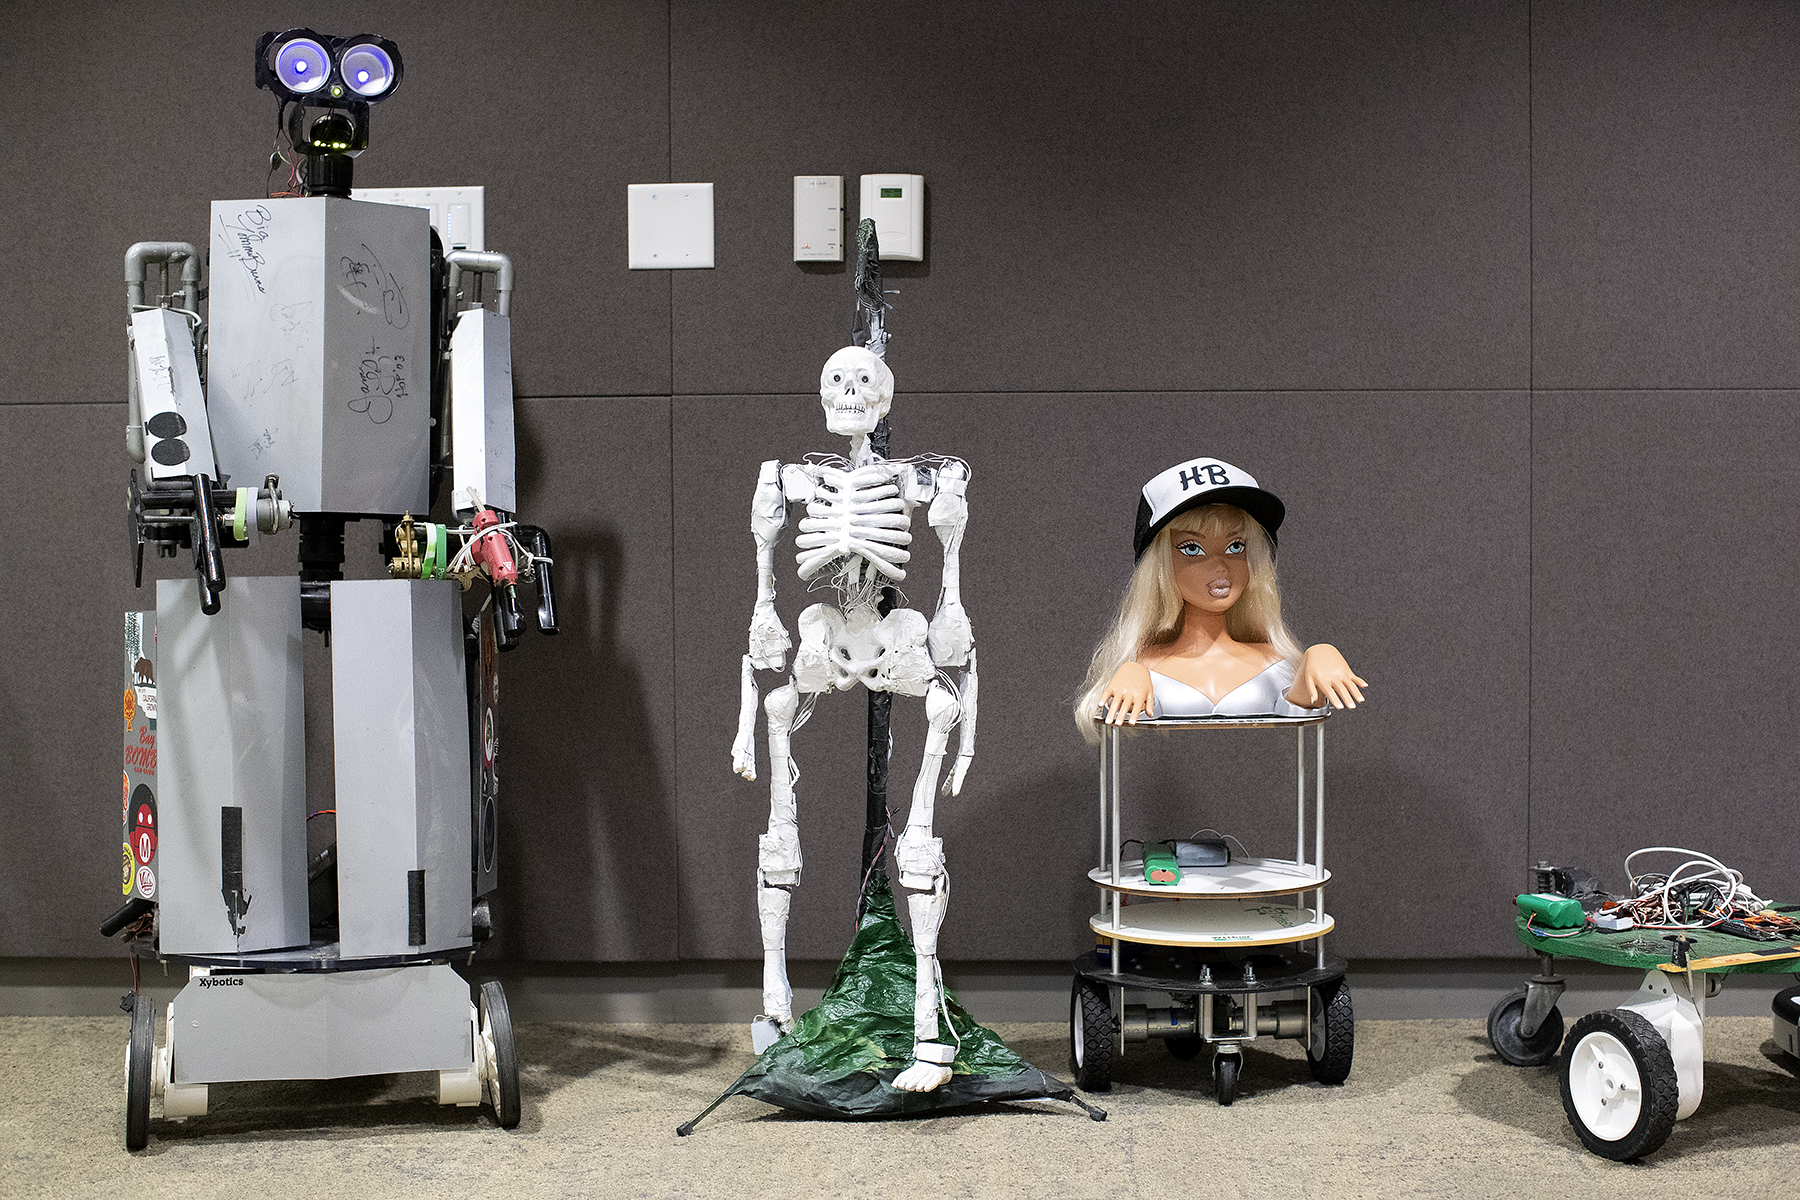 Robots are seen lining the wall during a meeting of the HomeBrew Robotics Club, in a room donated for use by Google on their campus, during the club's monthly meeting in Mountain View, Calif., on Wednesday, June 27, 2018. During this phase of the challenge the robot had to go from one end of the table to the other and back. The club of robot enthusiasts meets once a month. The HomeBrew Robotics Club grew out of what was the original HomeBrew Computer Club, which was very important in the history of the development of personal computing. The meeting was a special {quote}bot challenge{quote} meeting where members bring robots that can they can use to try to complete one of several challenges. The bot challenge meetings serve to encourage members to work on robots. CONTACTS: Osman Eralp (club president) osmaneralp@gmail.com